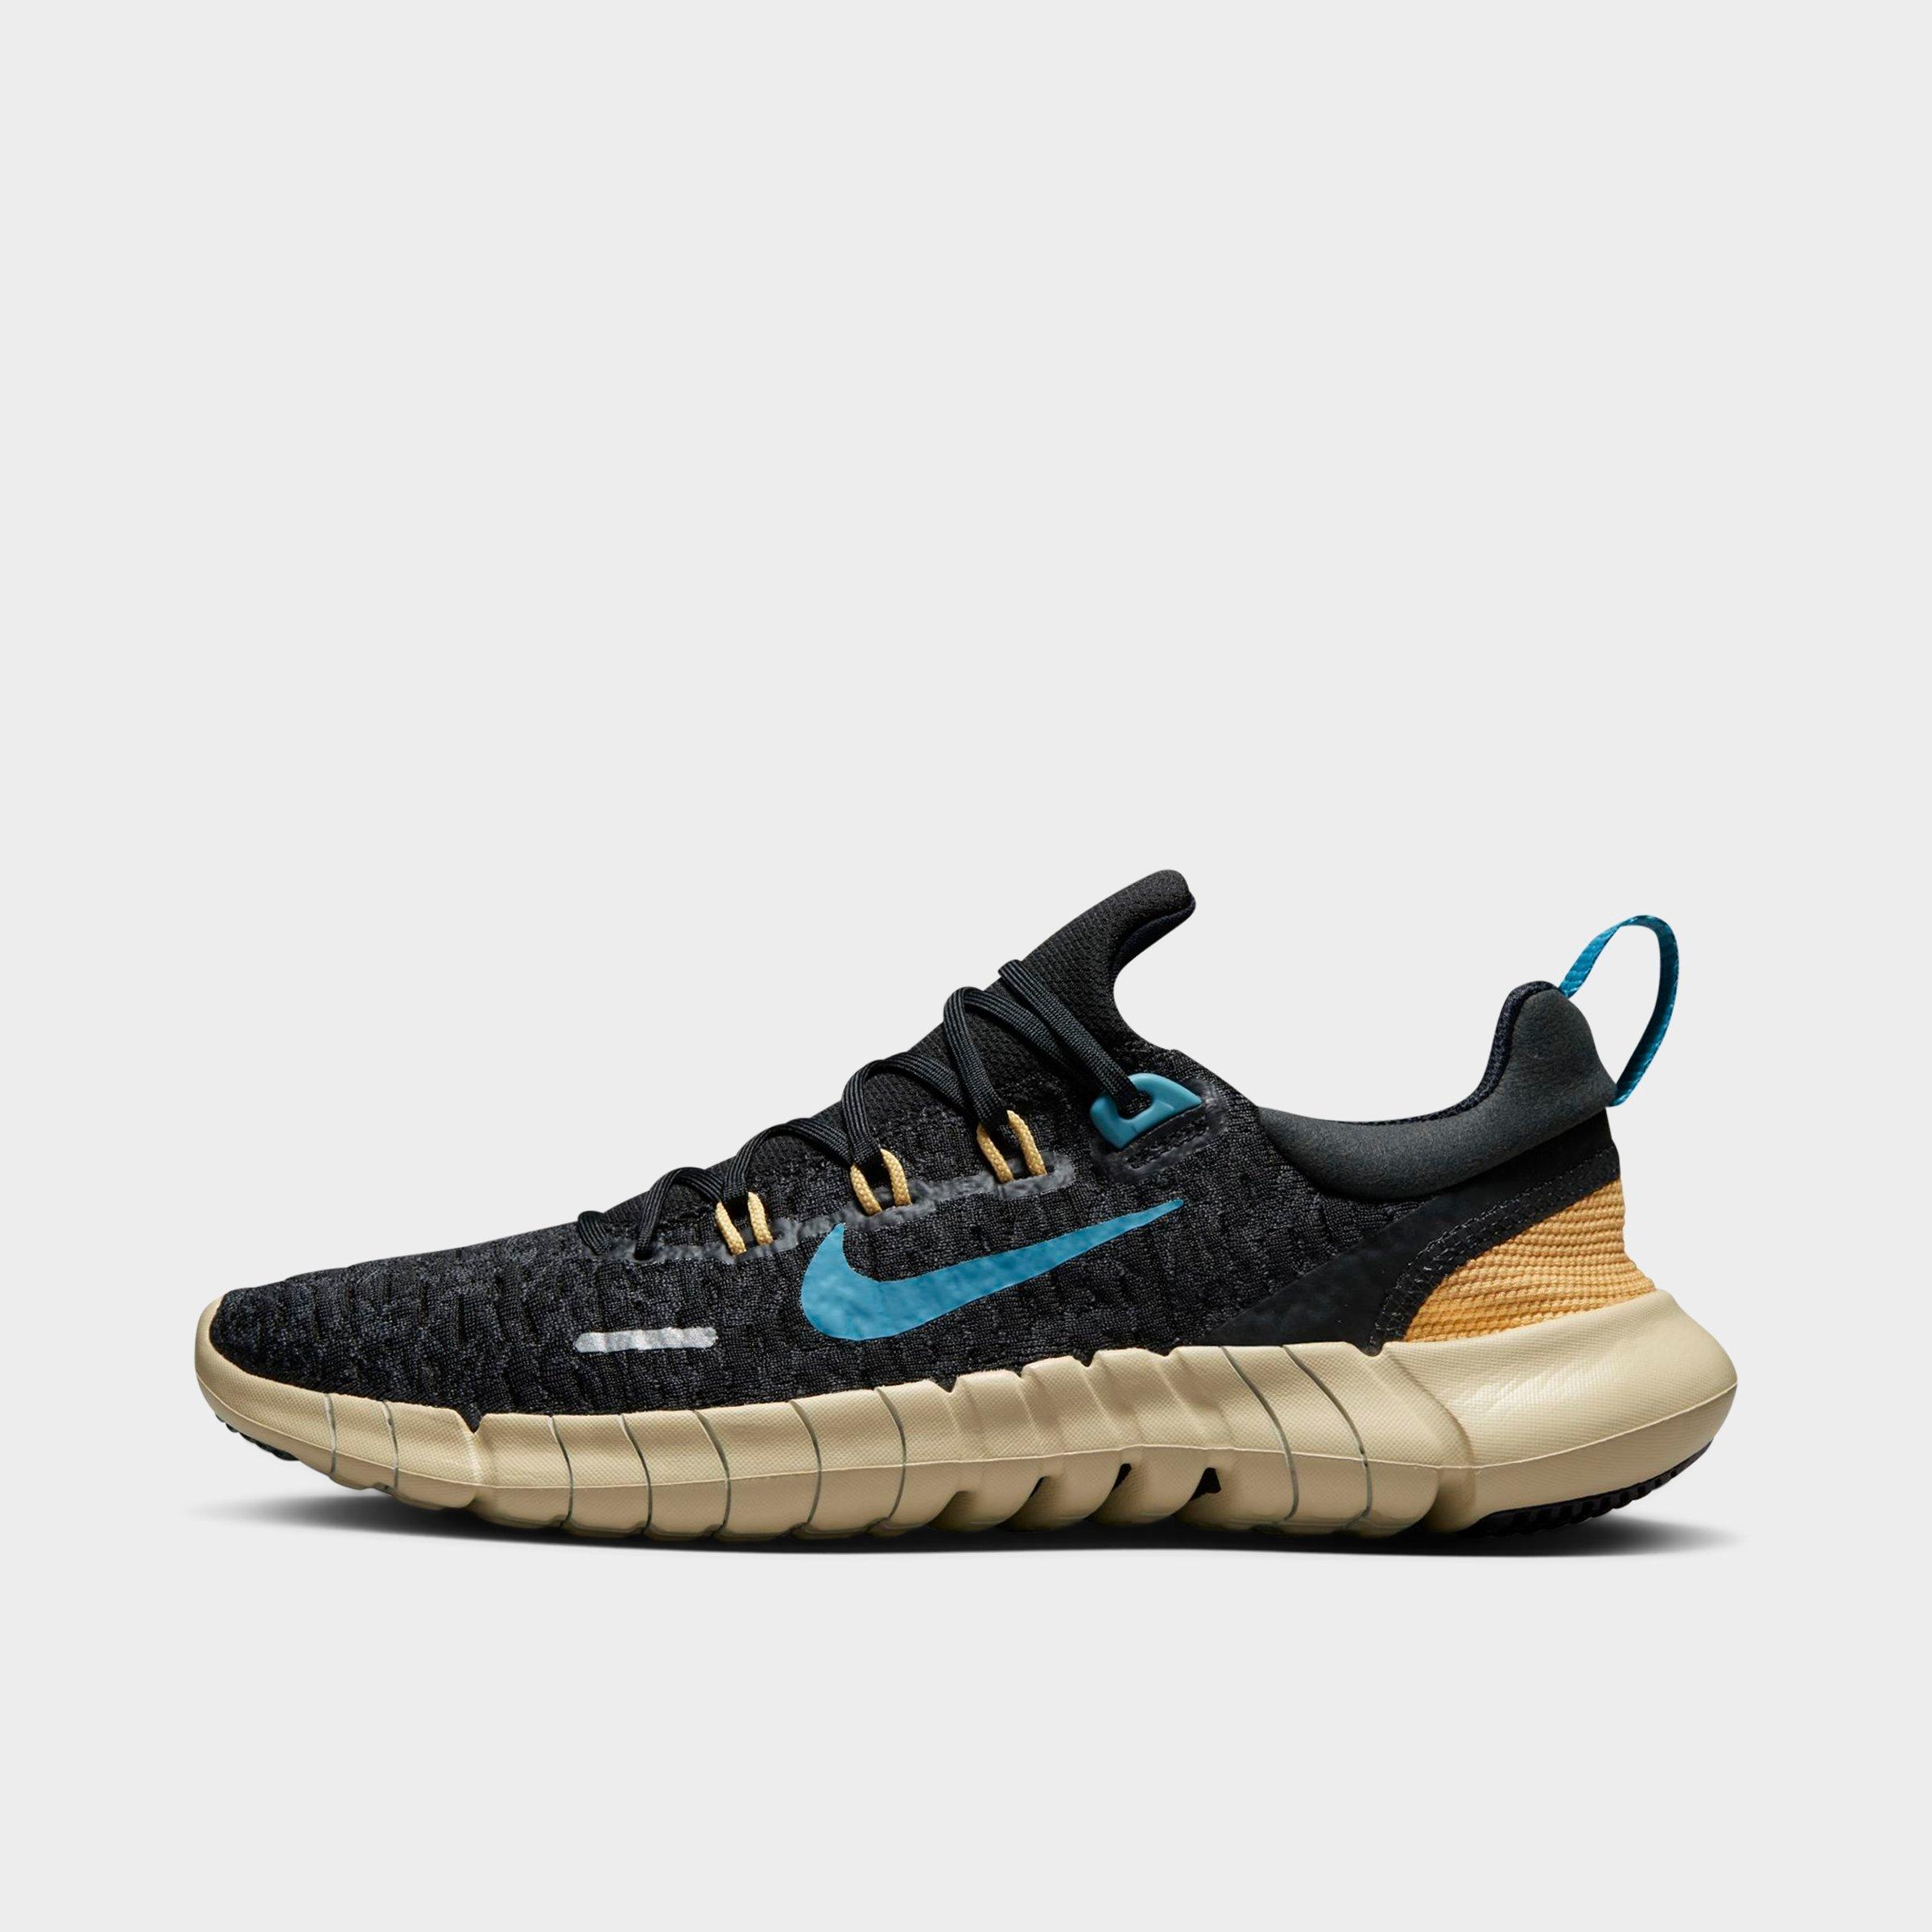 Nike Women's Free Run 5.0 Running Shoes In Black/noise Aqua/anthracite/wheat Gold/team Gold